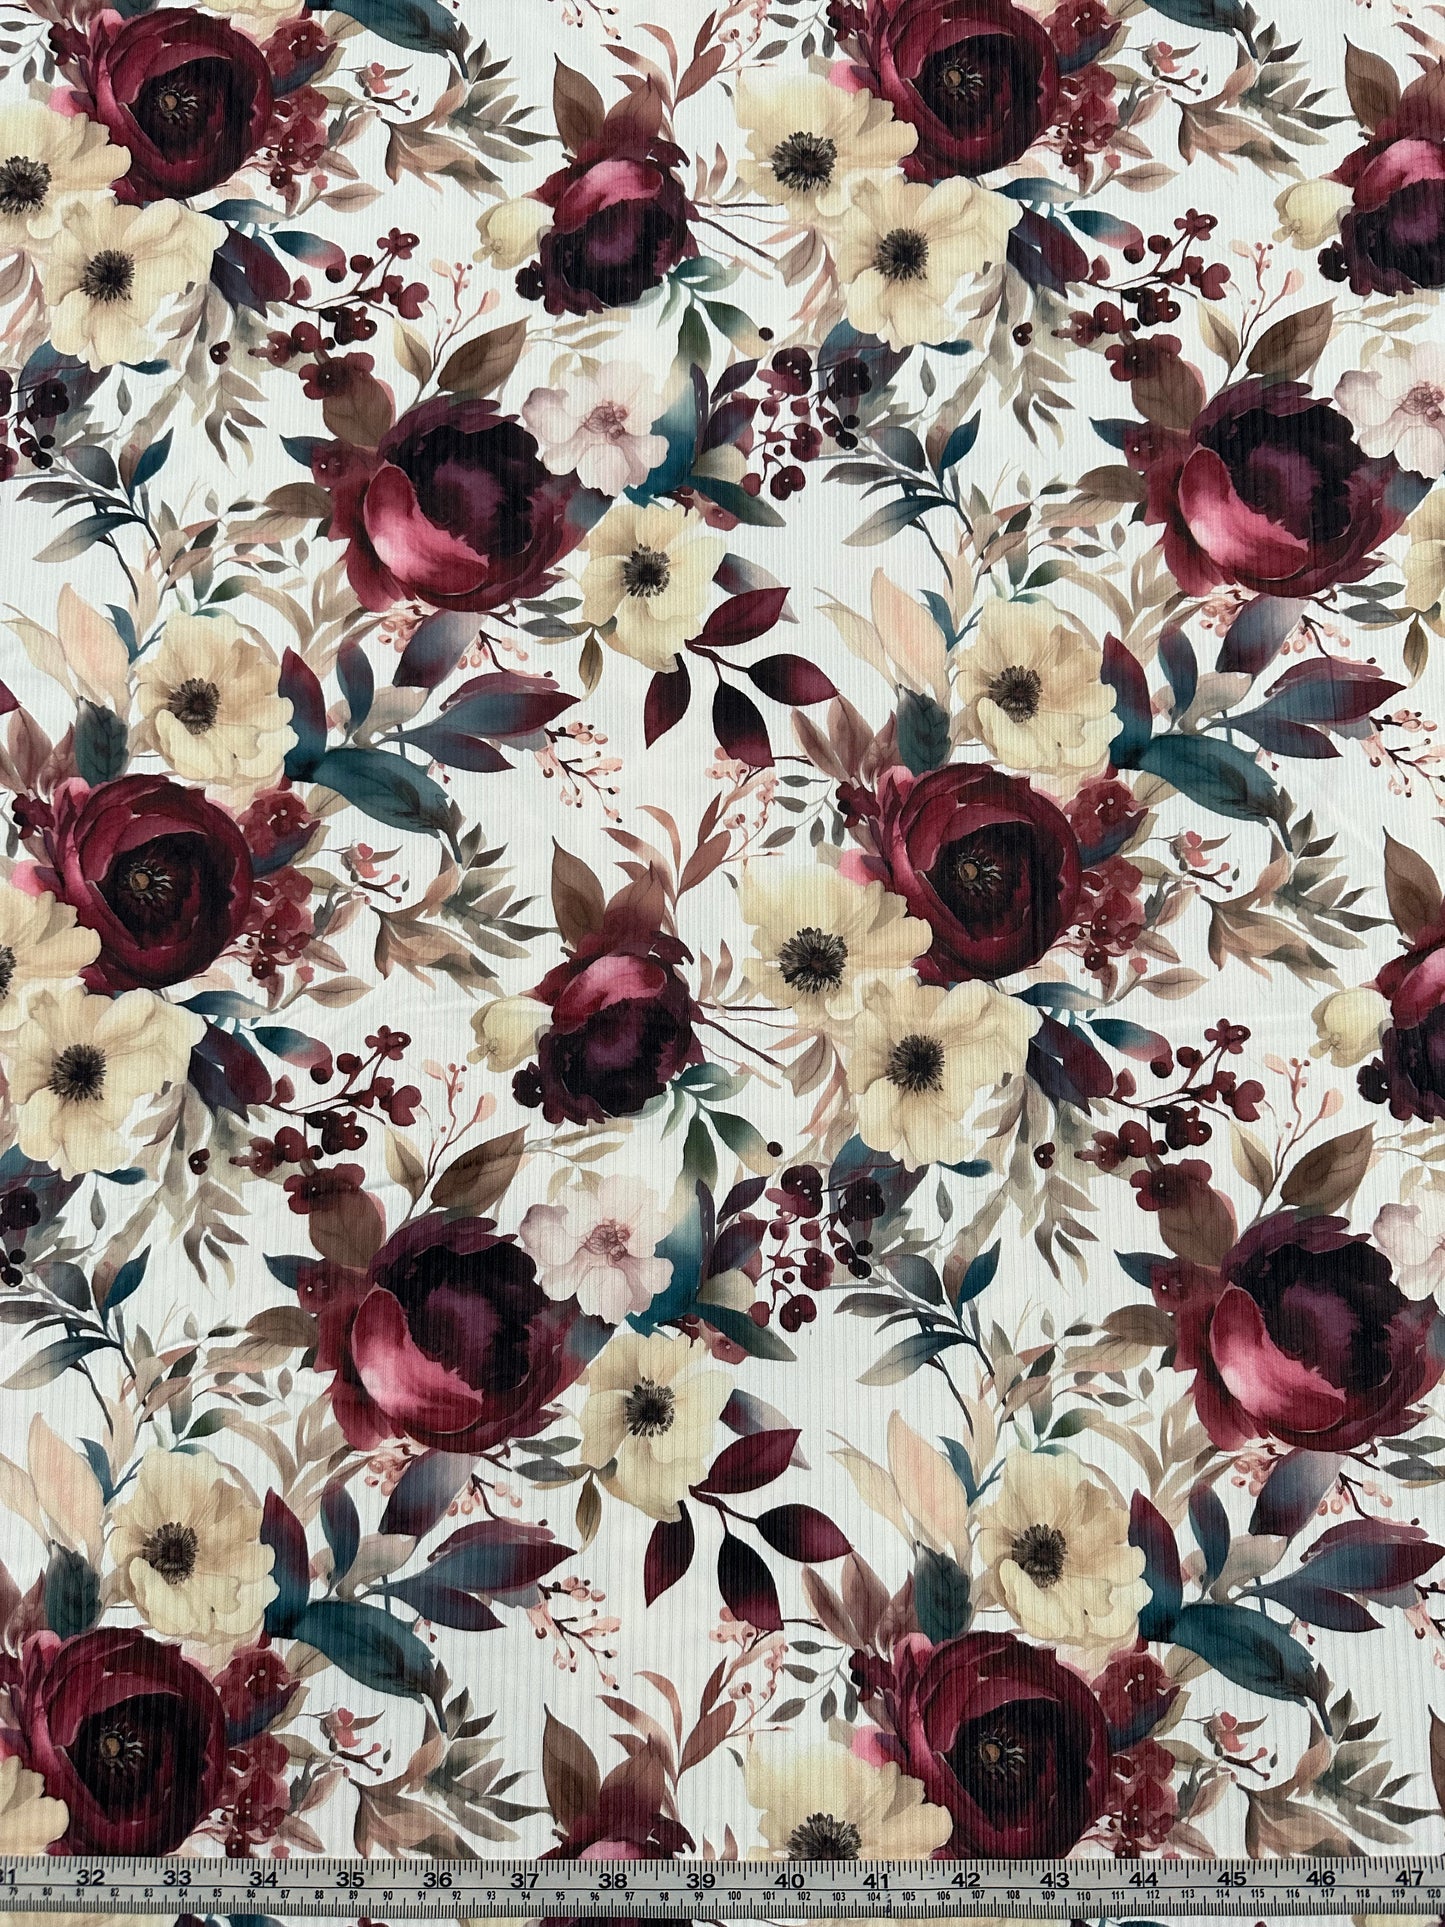 Gertie Floral on Unbrushed Rib Knit Fabric Sold by the 1/4 yard